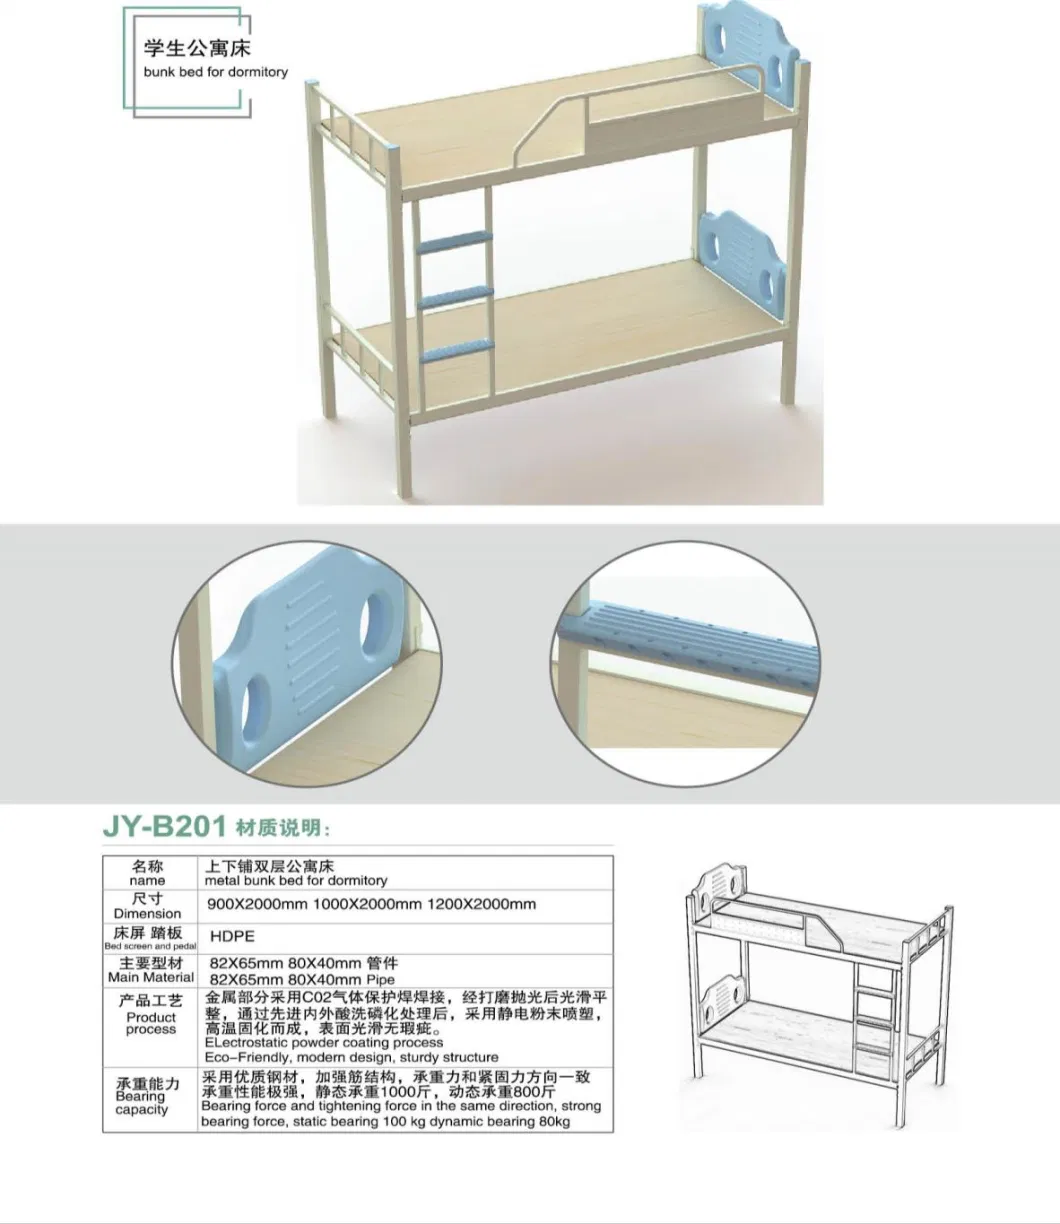 School Dormitory Furniture Student Wooden Metal Double Decker Comfortable Dormitory Structure-Strong Bunk Bed